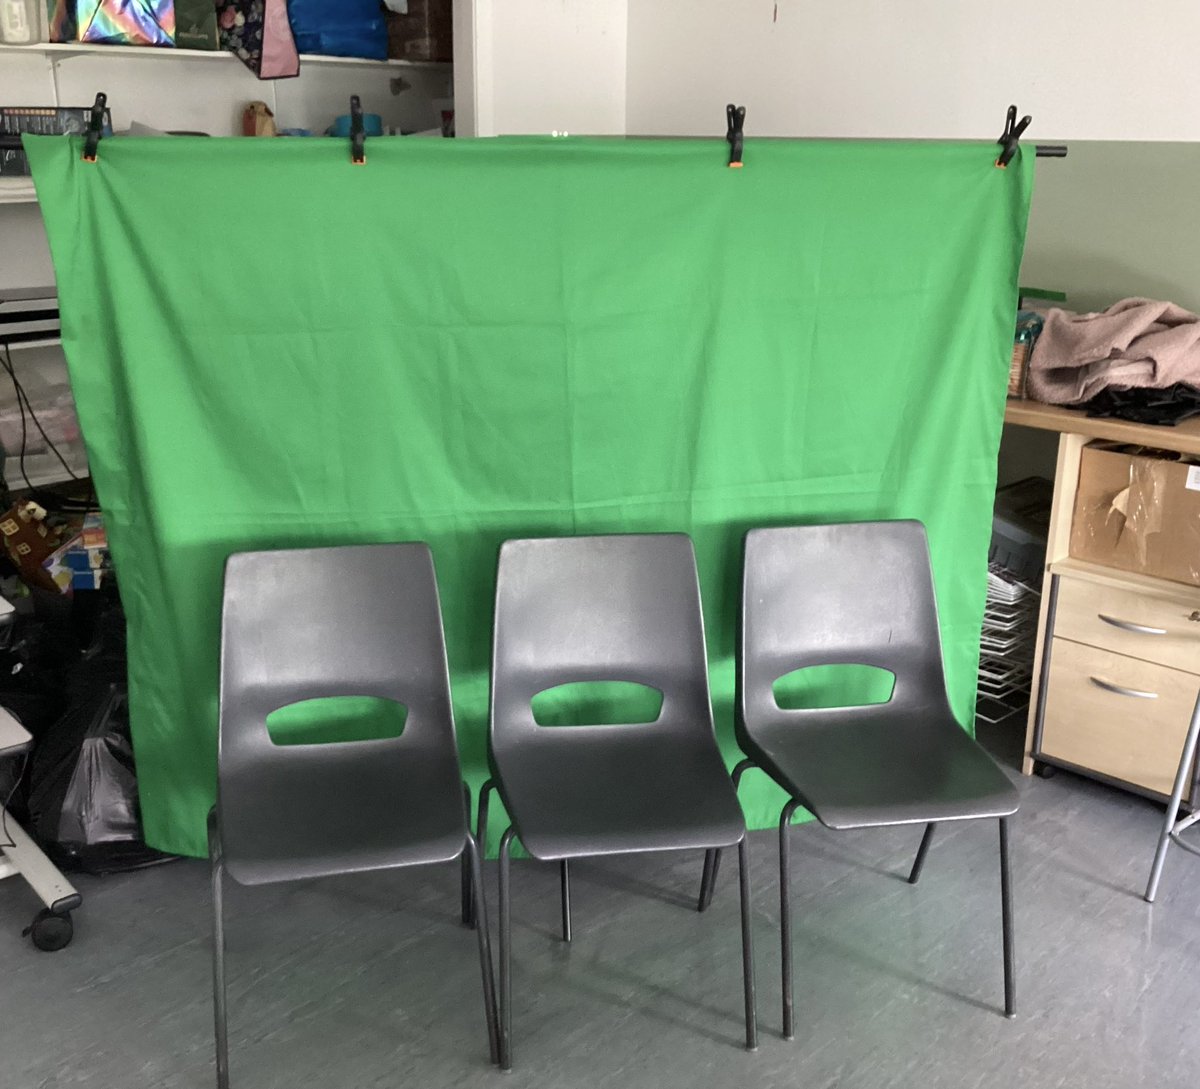 Busy couple of days @BridgetPrimary working with all classes learning about various digital devices including Dash, #GreenScreen and #Blogs. @WonderWorkshop #iMovie #iPadEd #SDLW24 @NAC_Education @NAC_PLA